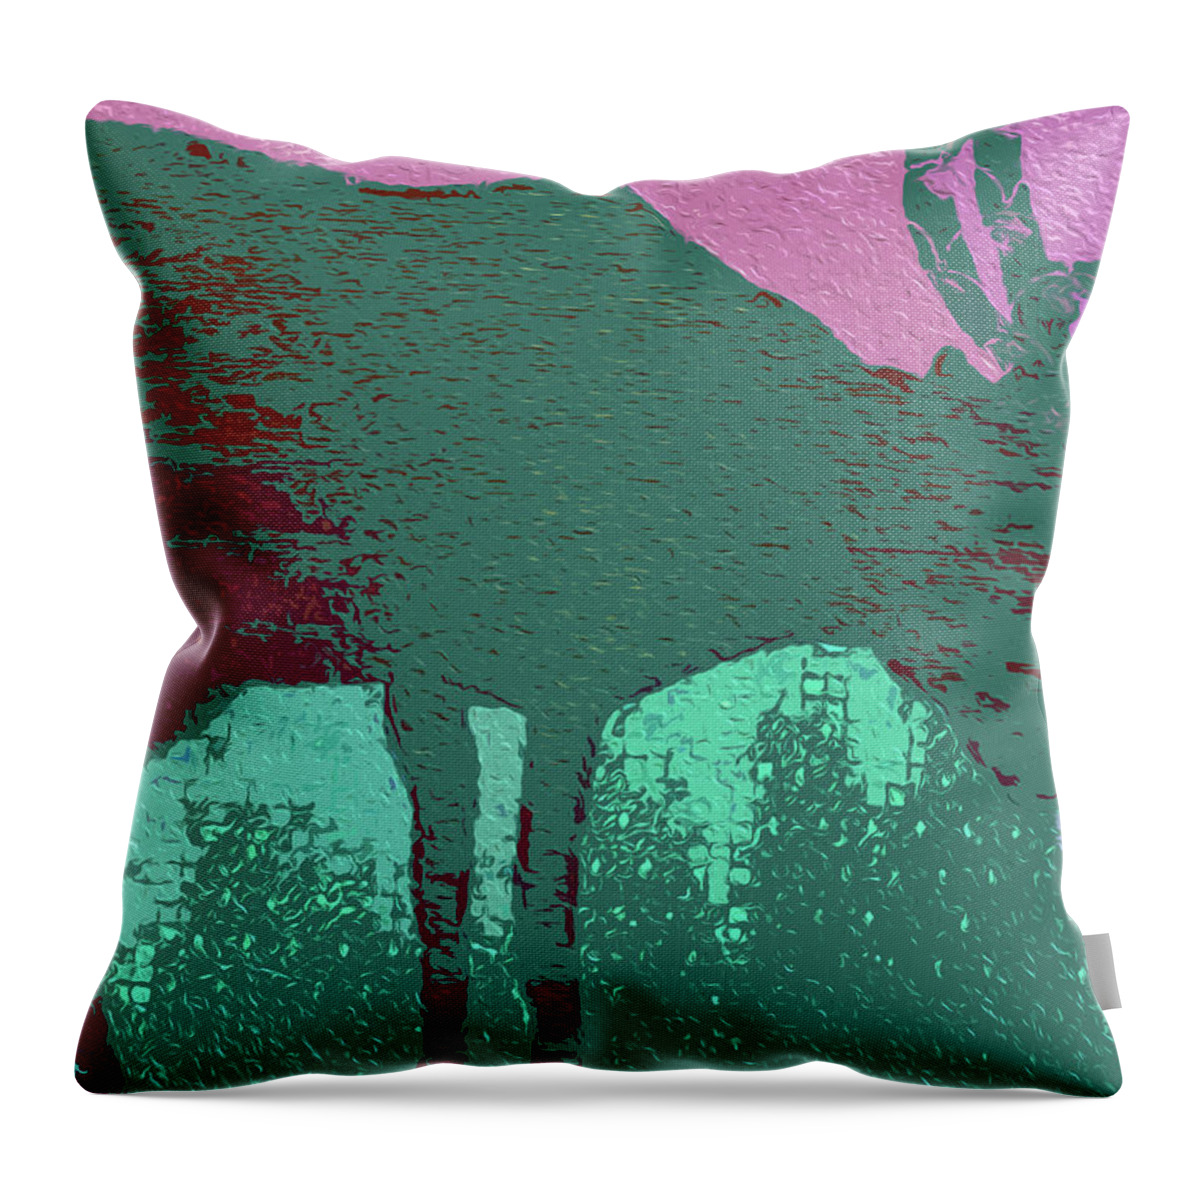 Moose Throw Pillow featuring the painting Crazy Looking Moose by Robert Margetts